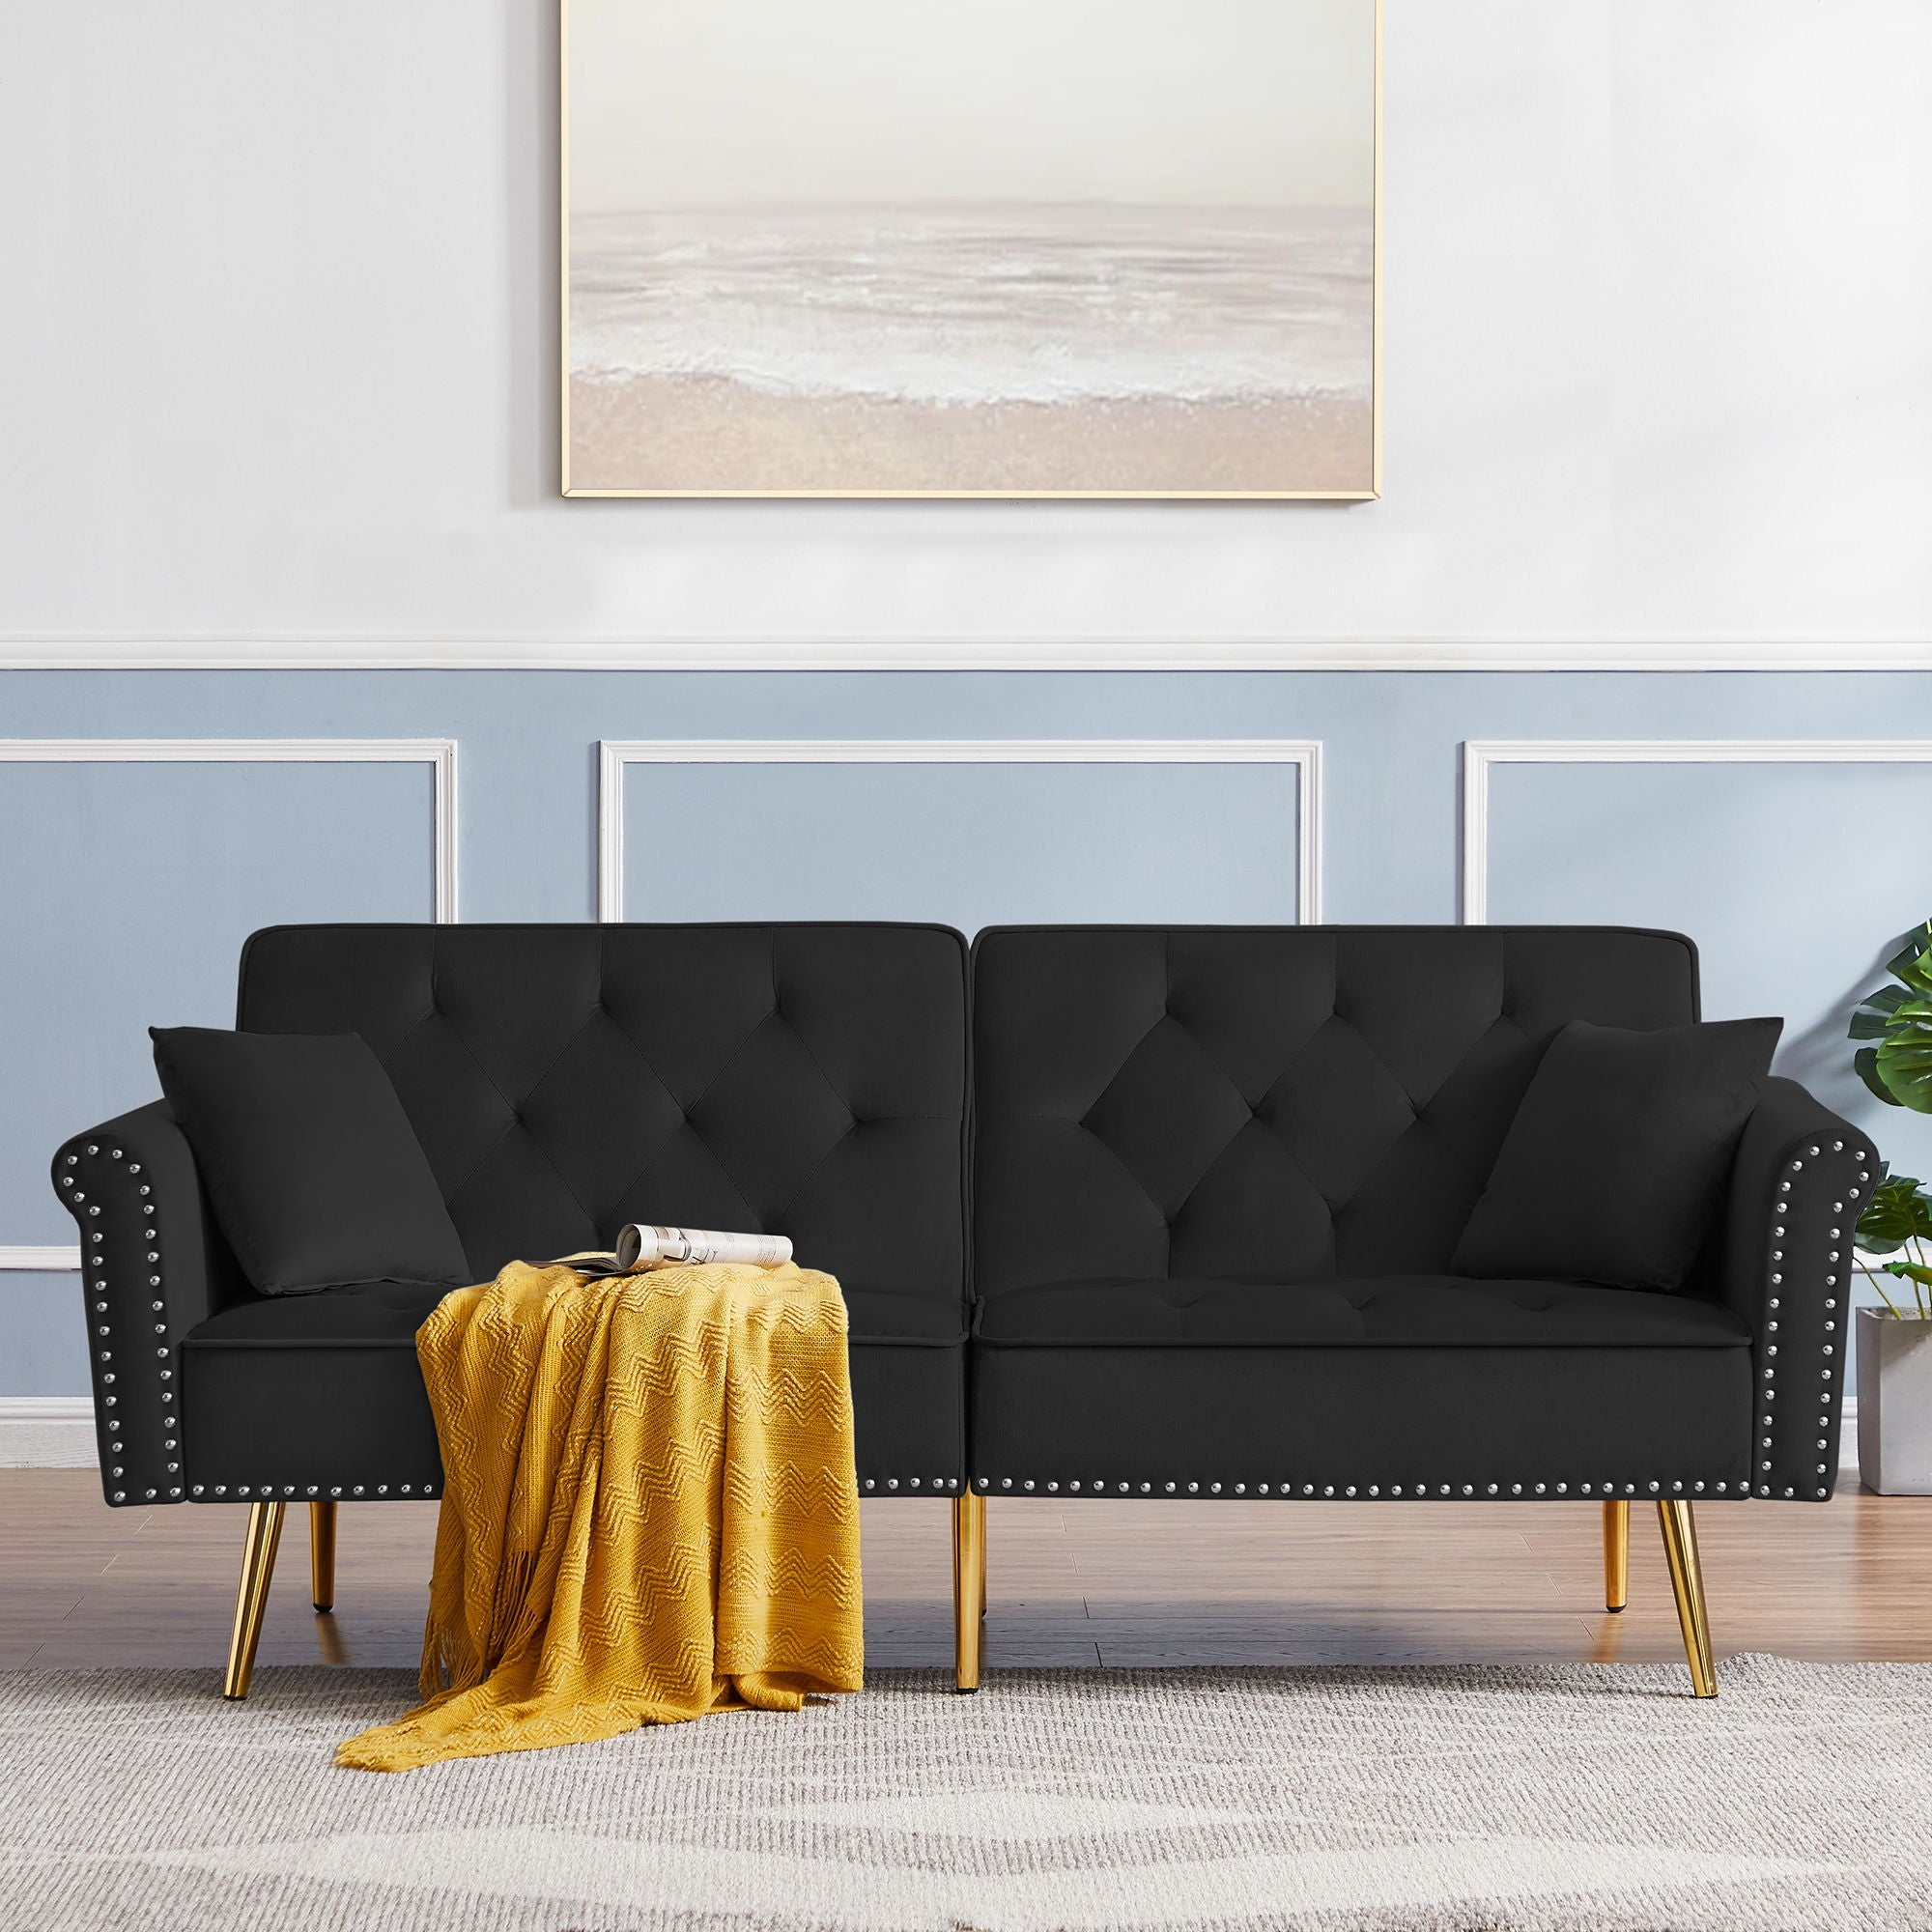 Modern Velvet Tufted Sofa Couch With 2 Pillows And Nailhead Trim, Loveseat Sofa Futon Sofa Bed With Metal Legs For Living Room - Black